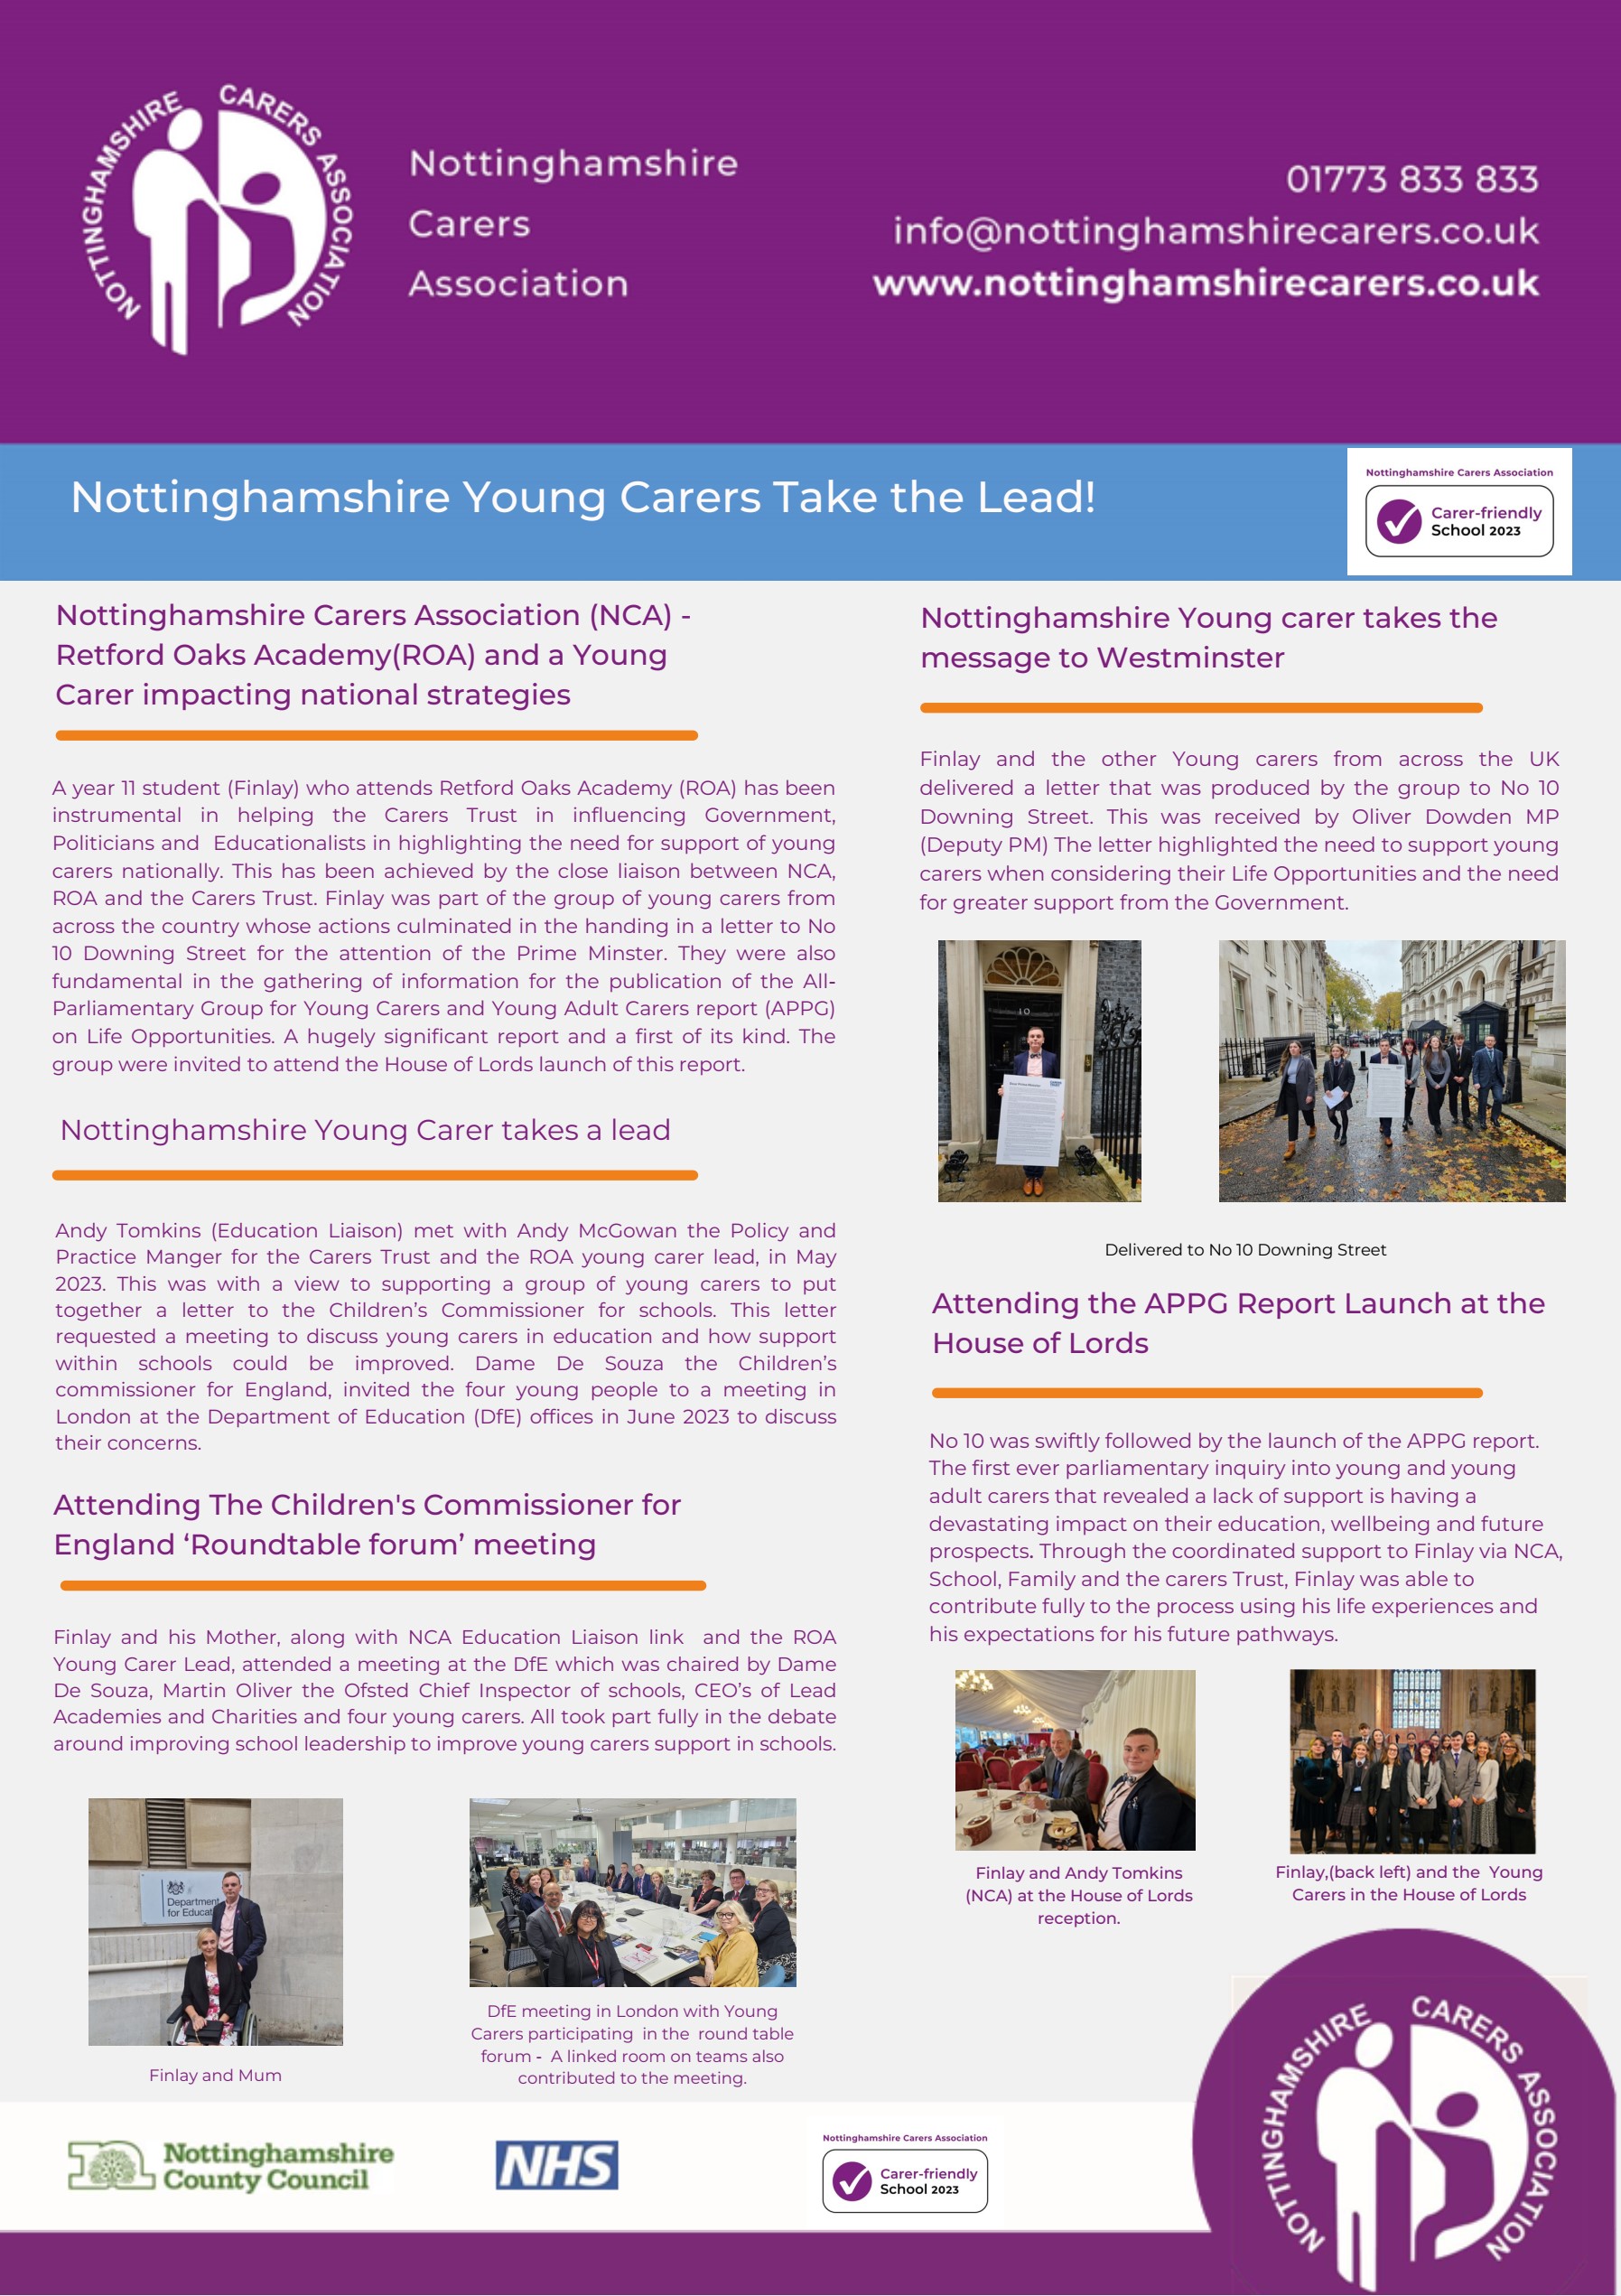 NCA-ROA-Carers Trust- Young Carer influence national strategy.jpg (901 KB)